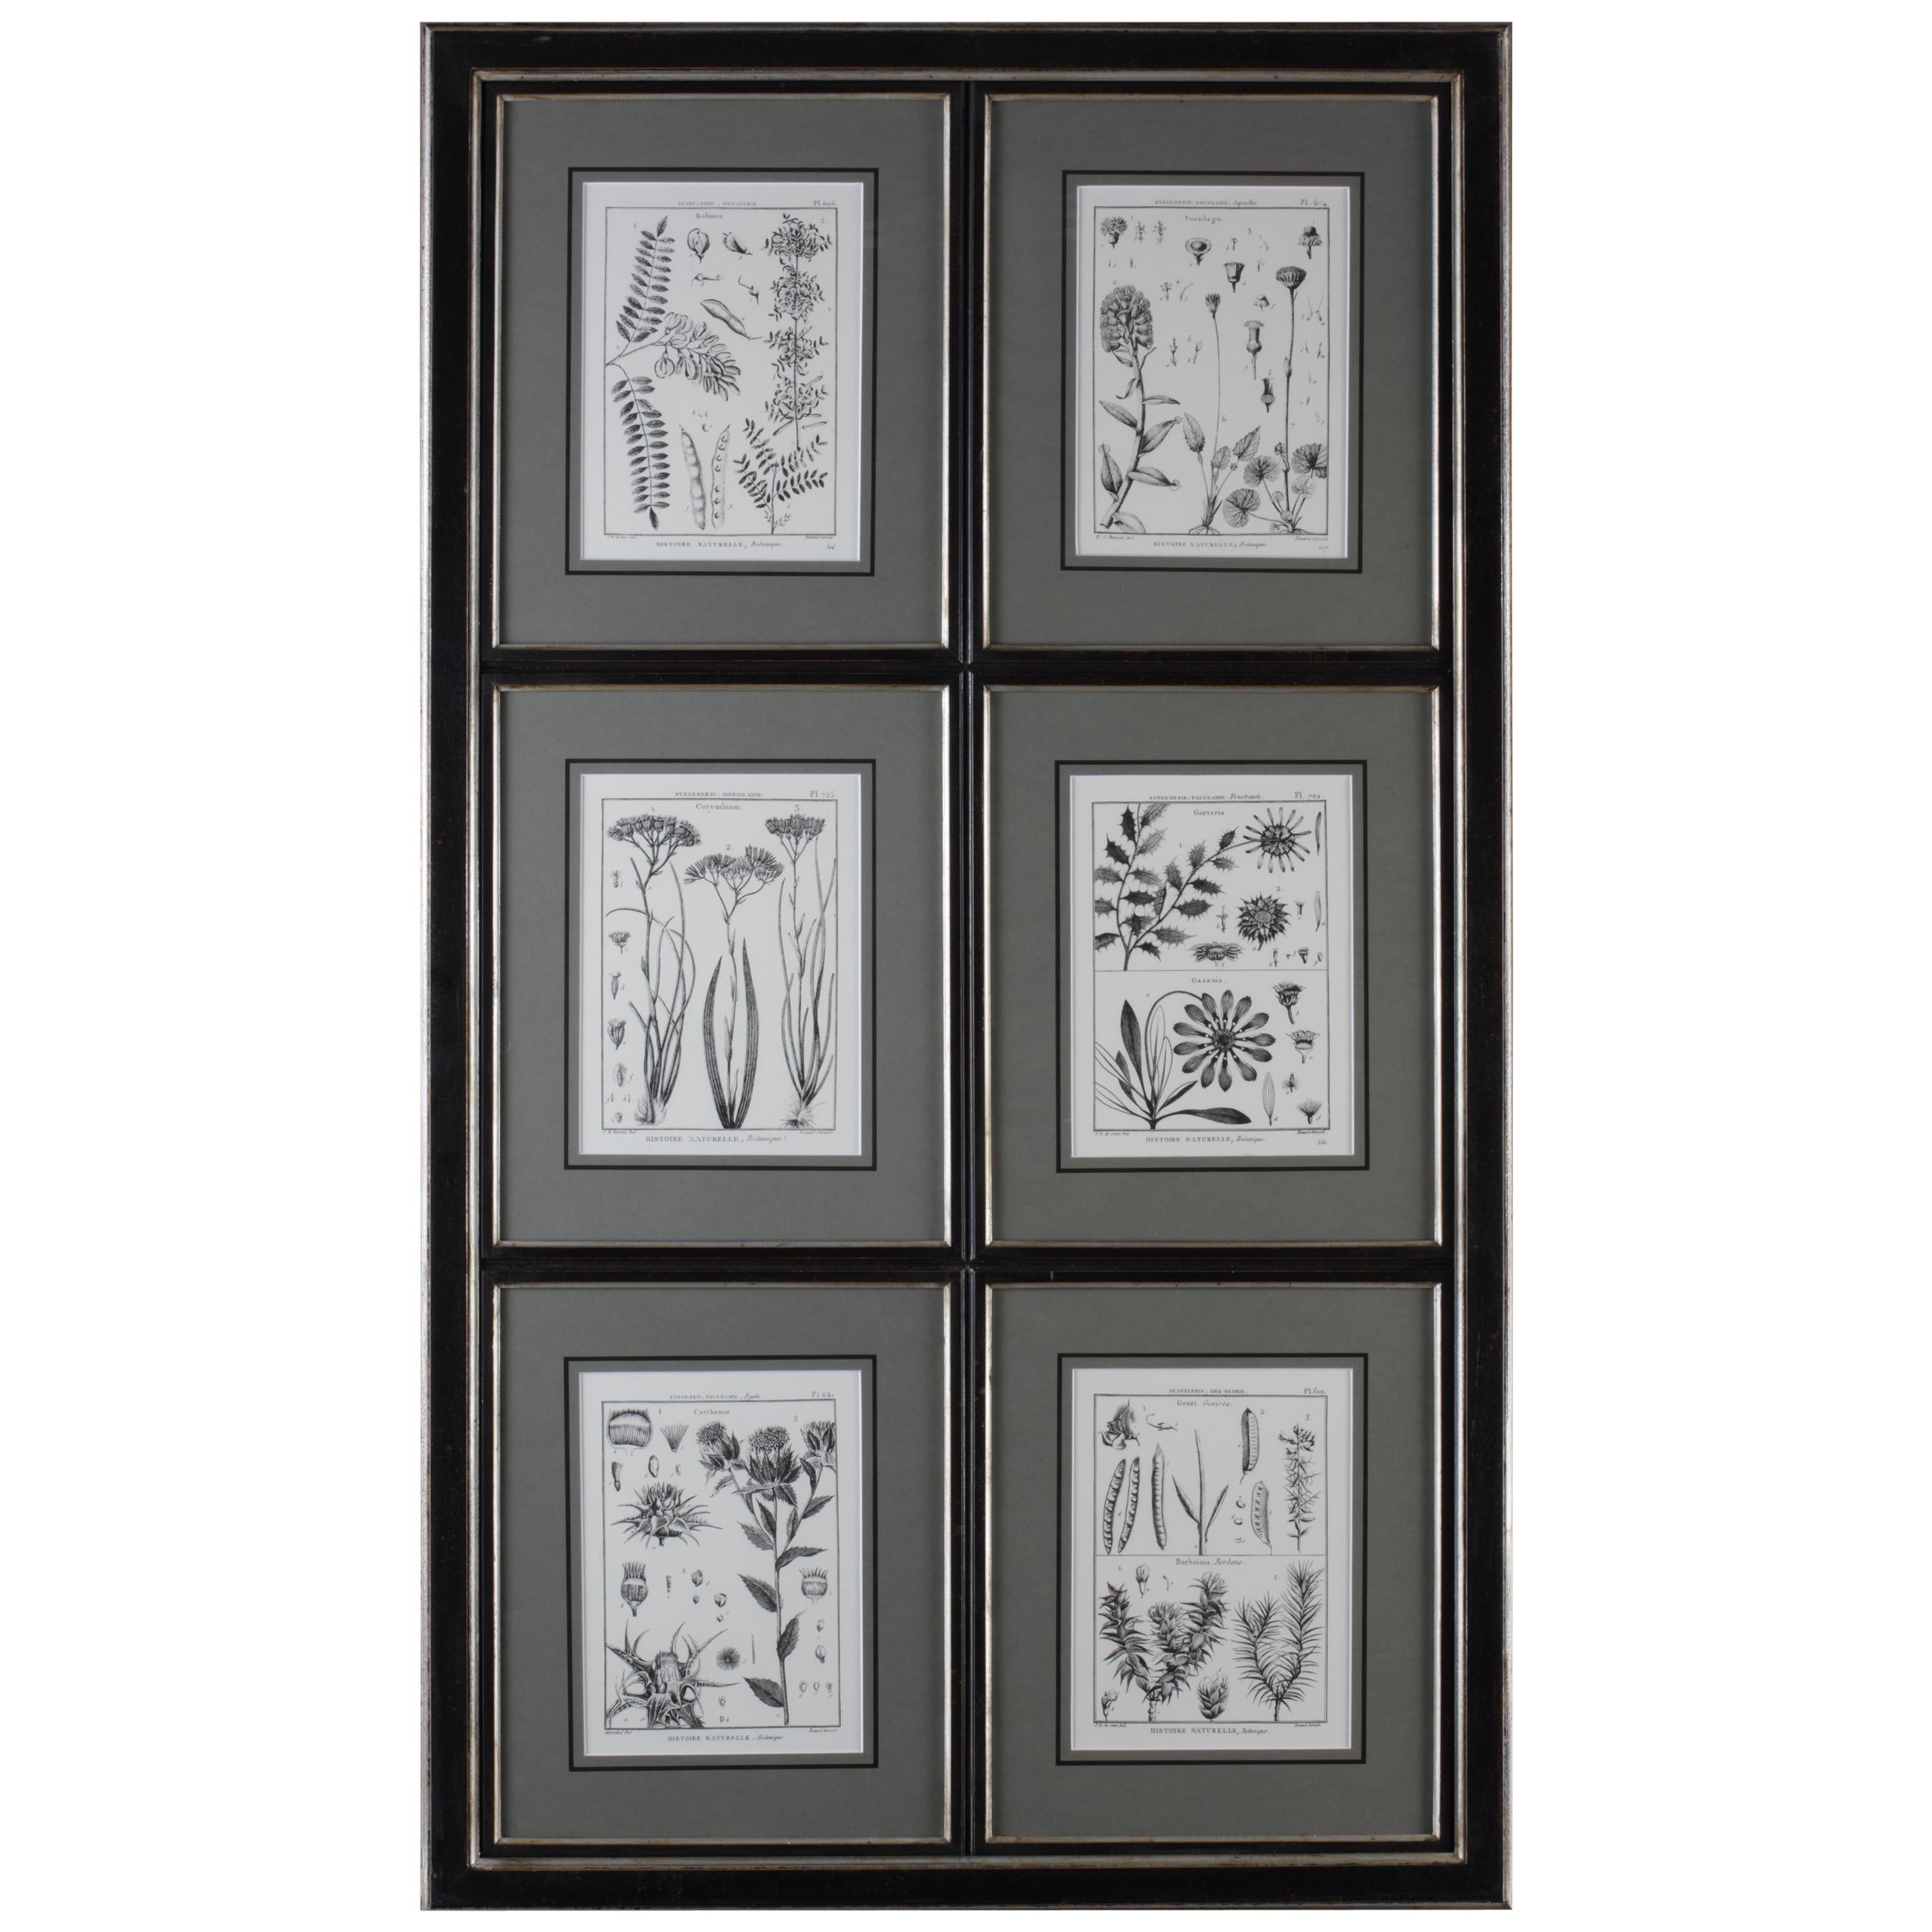  18th Century style Collection of Six Botanical Print with black wooden frame